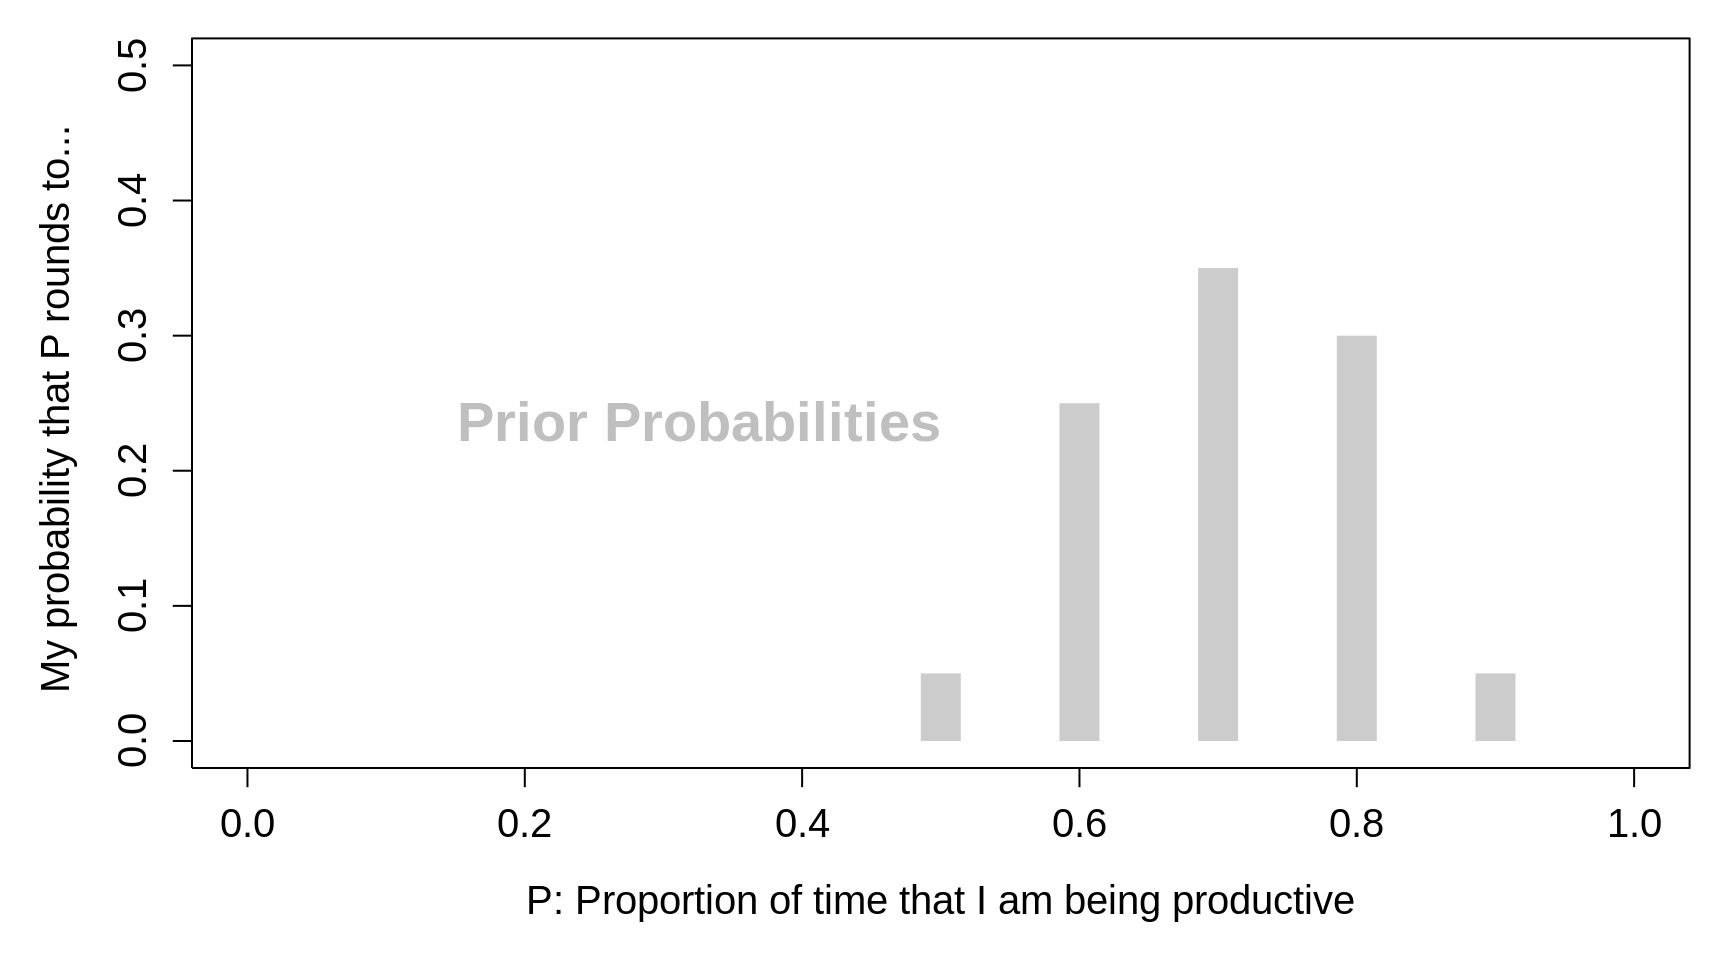 Prior Probabilities for the parameter P, the proportion of time that I am being productive.